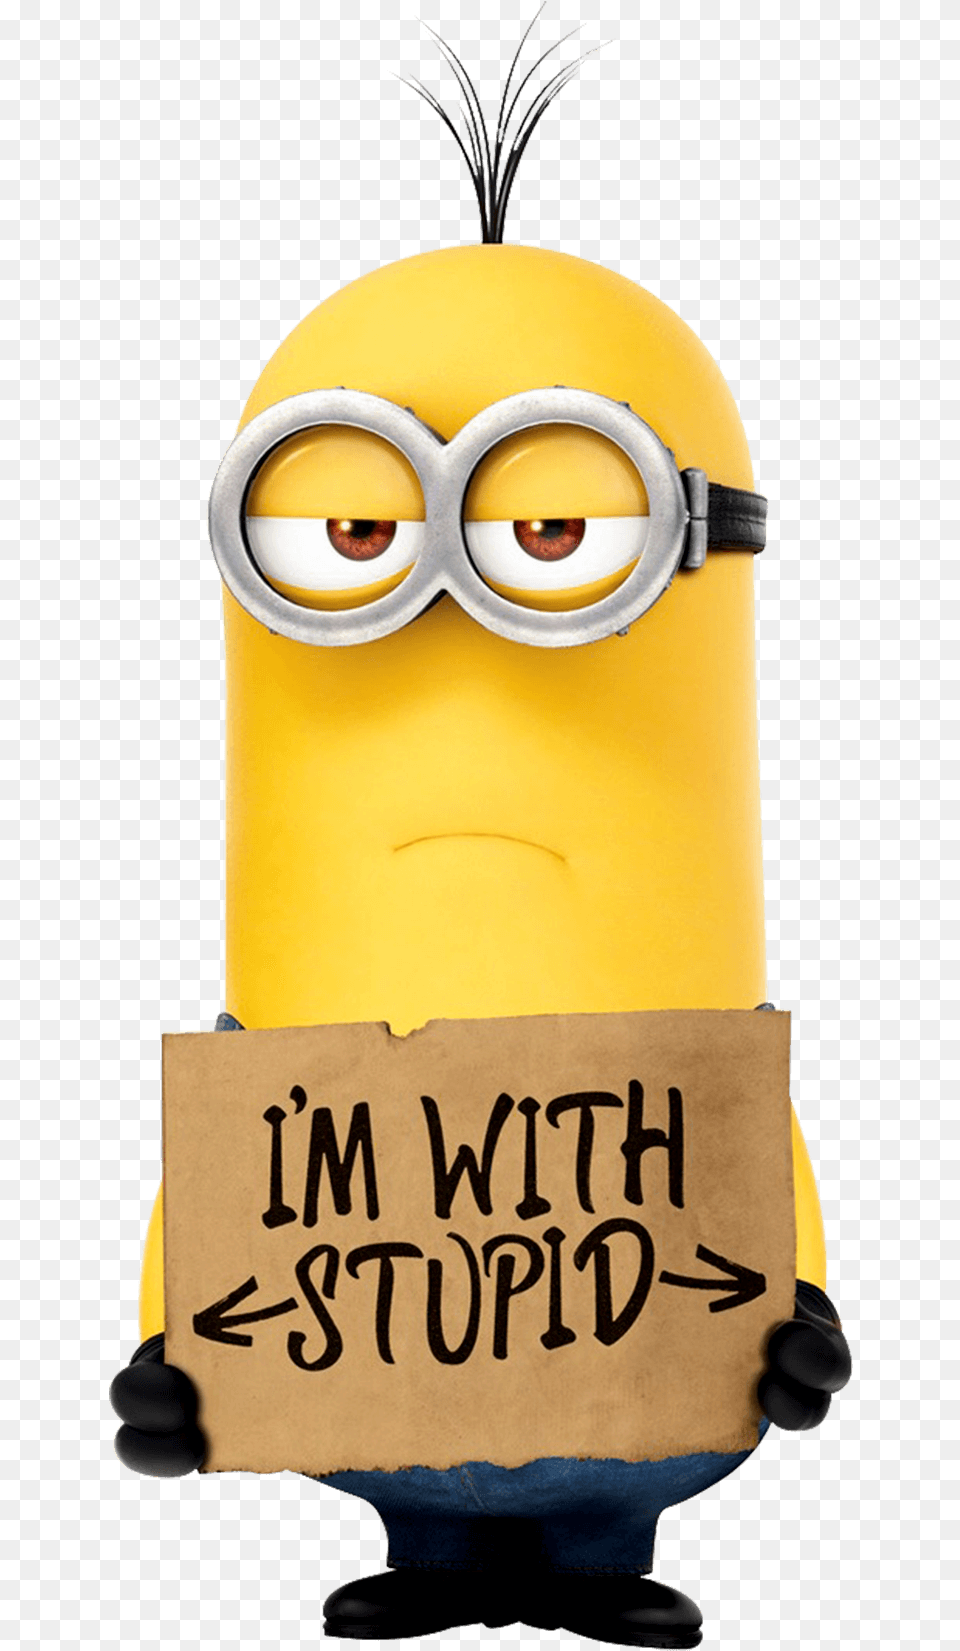 Despicable Me Minion Free Download Searchpngcom Iphone 6 Cartoon Wallpaper Iphone, Text, Accessories, Goggles, Baby Png Image